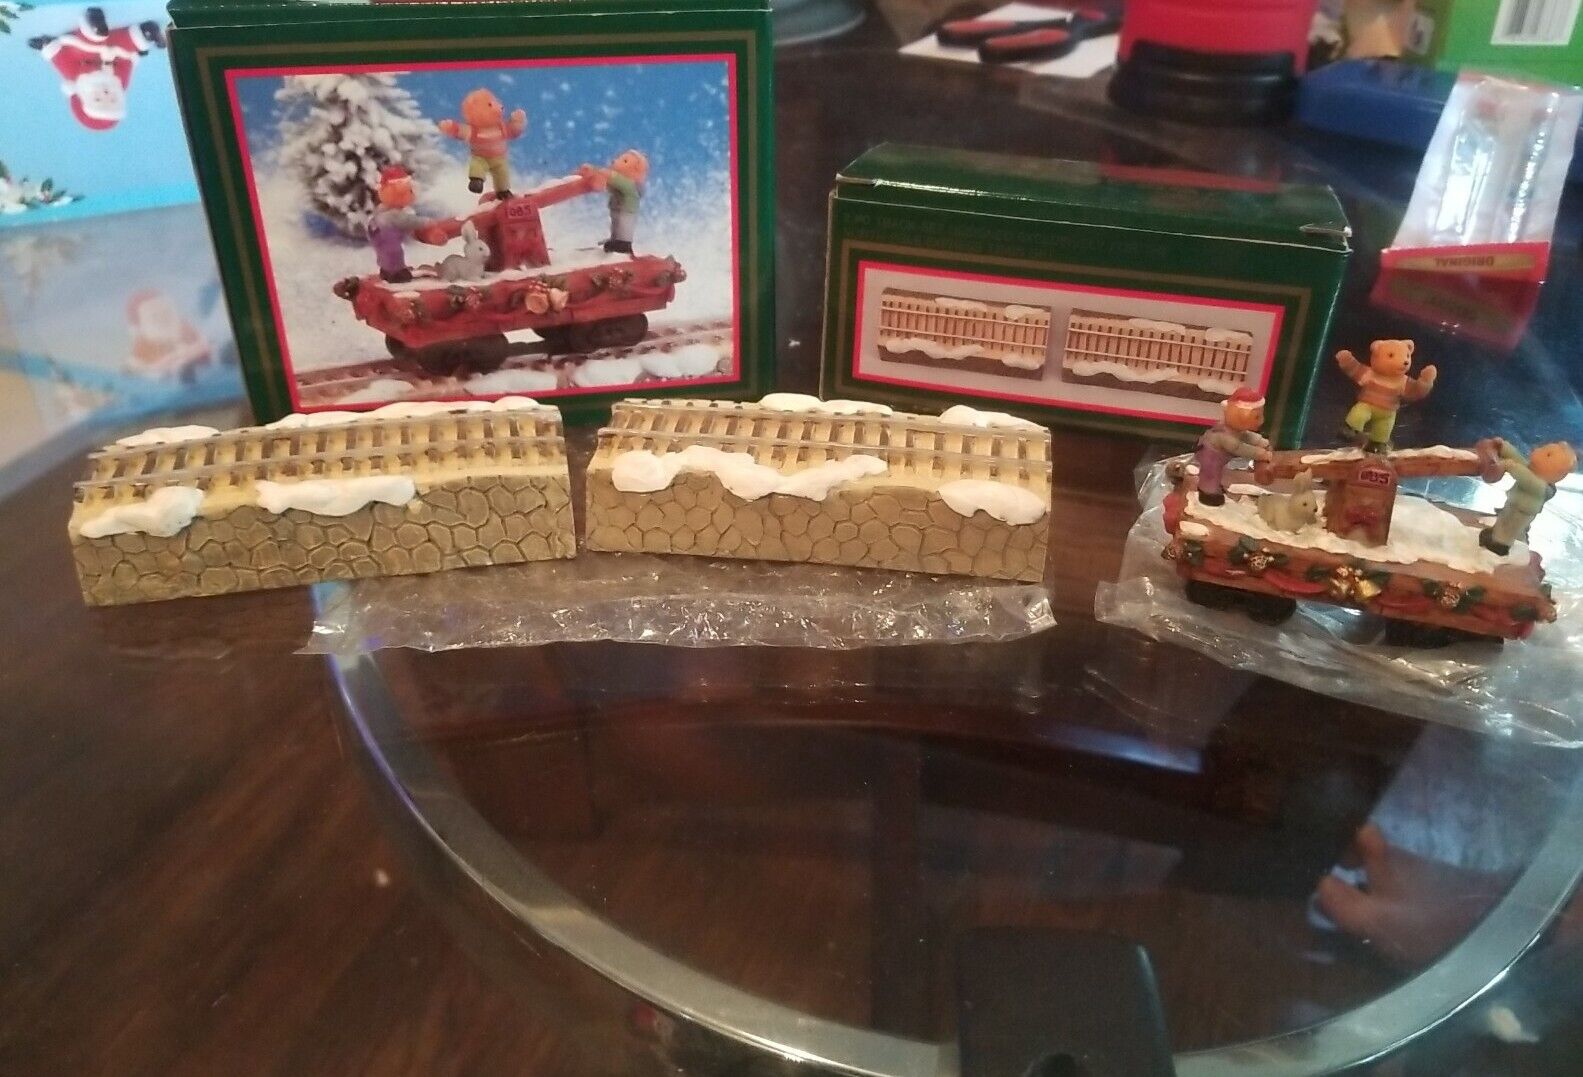 2 Vintage 1995 North Pole Express Christmas Train Car And Tracks In Original Box